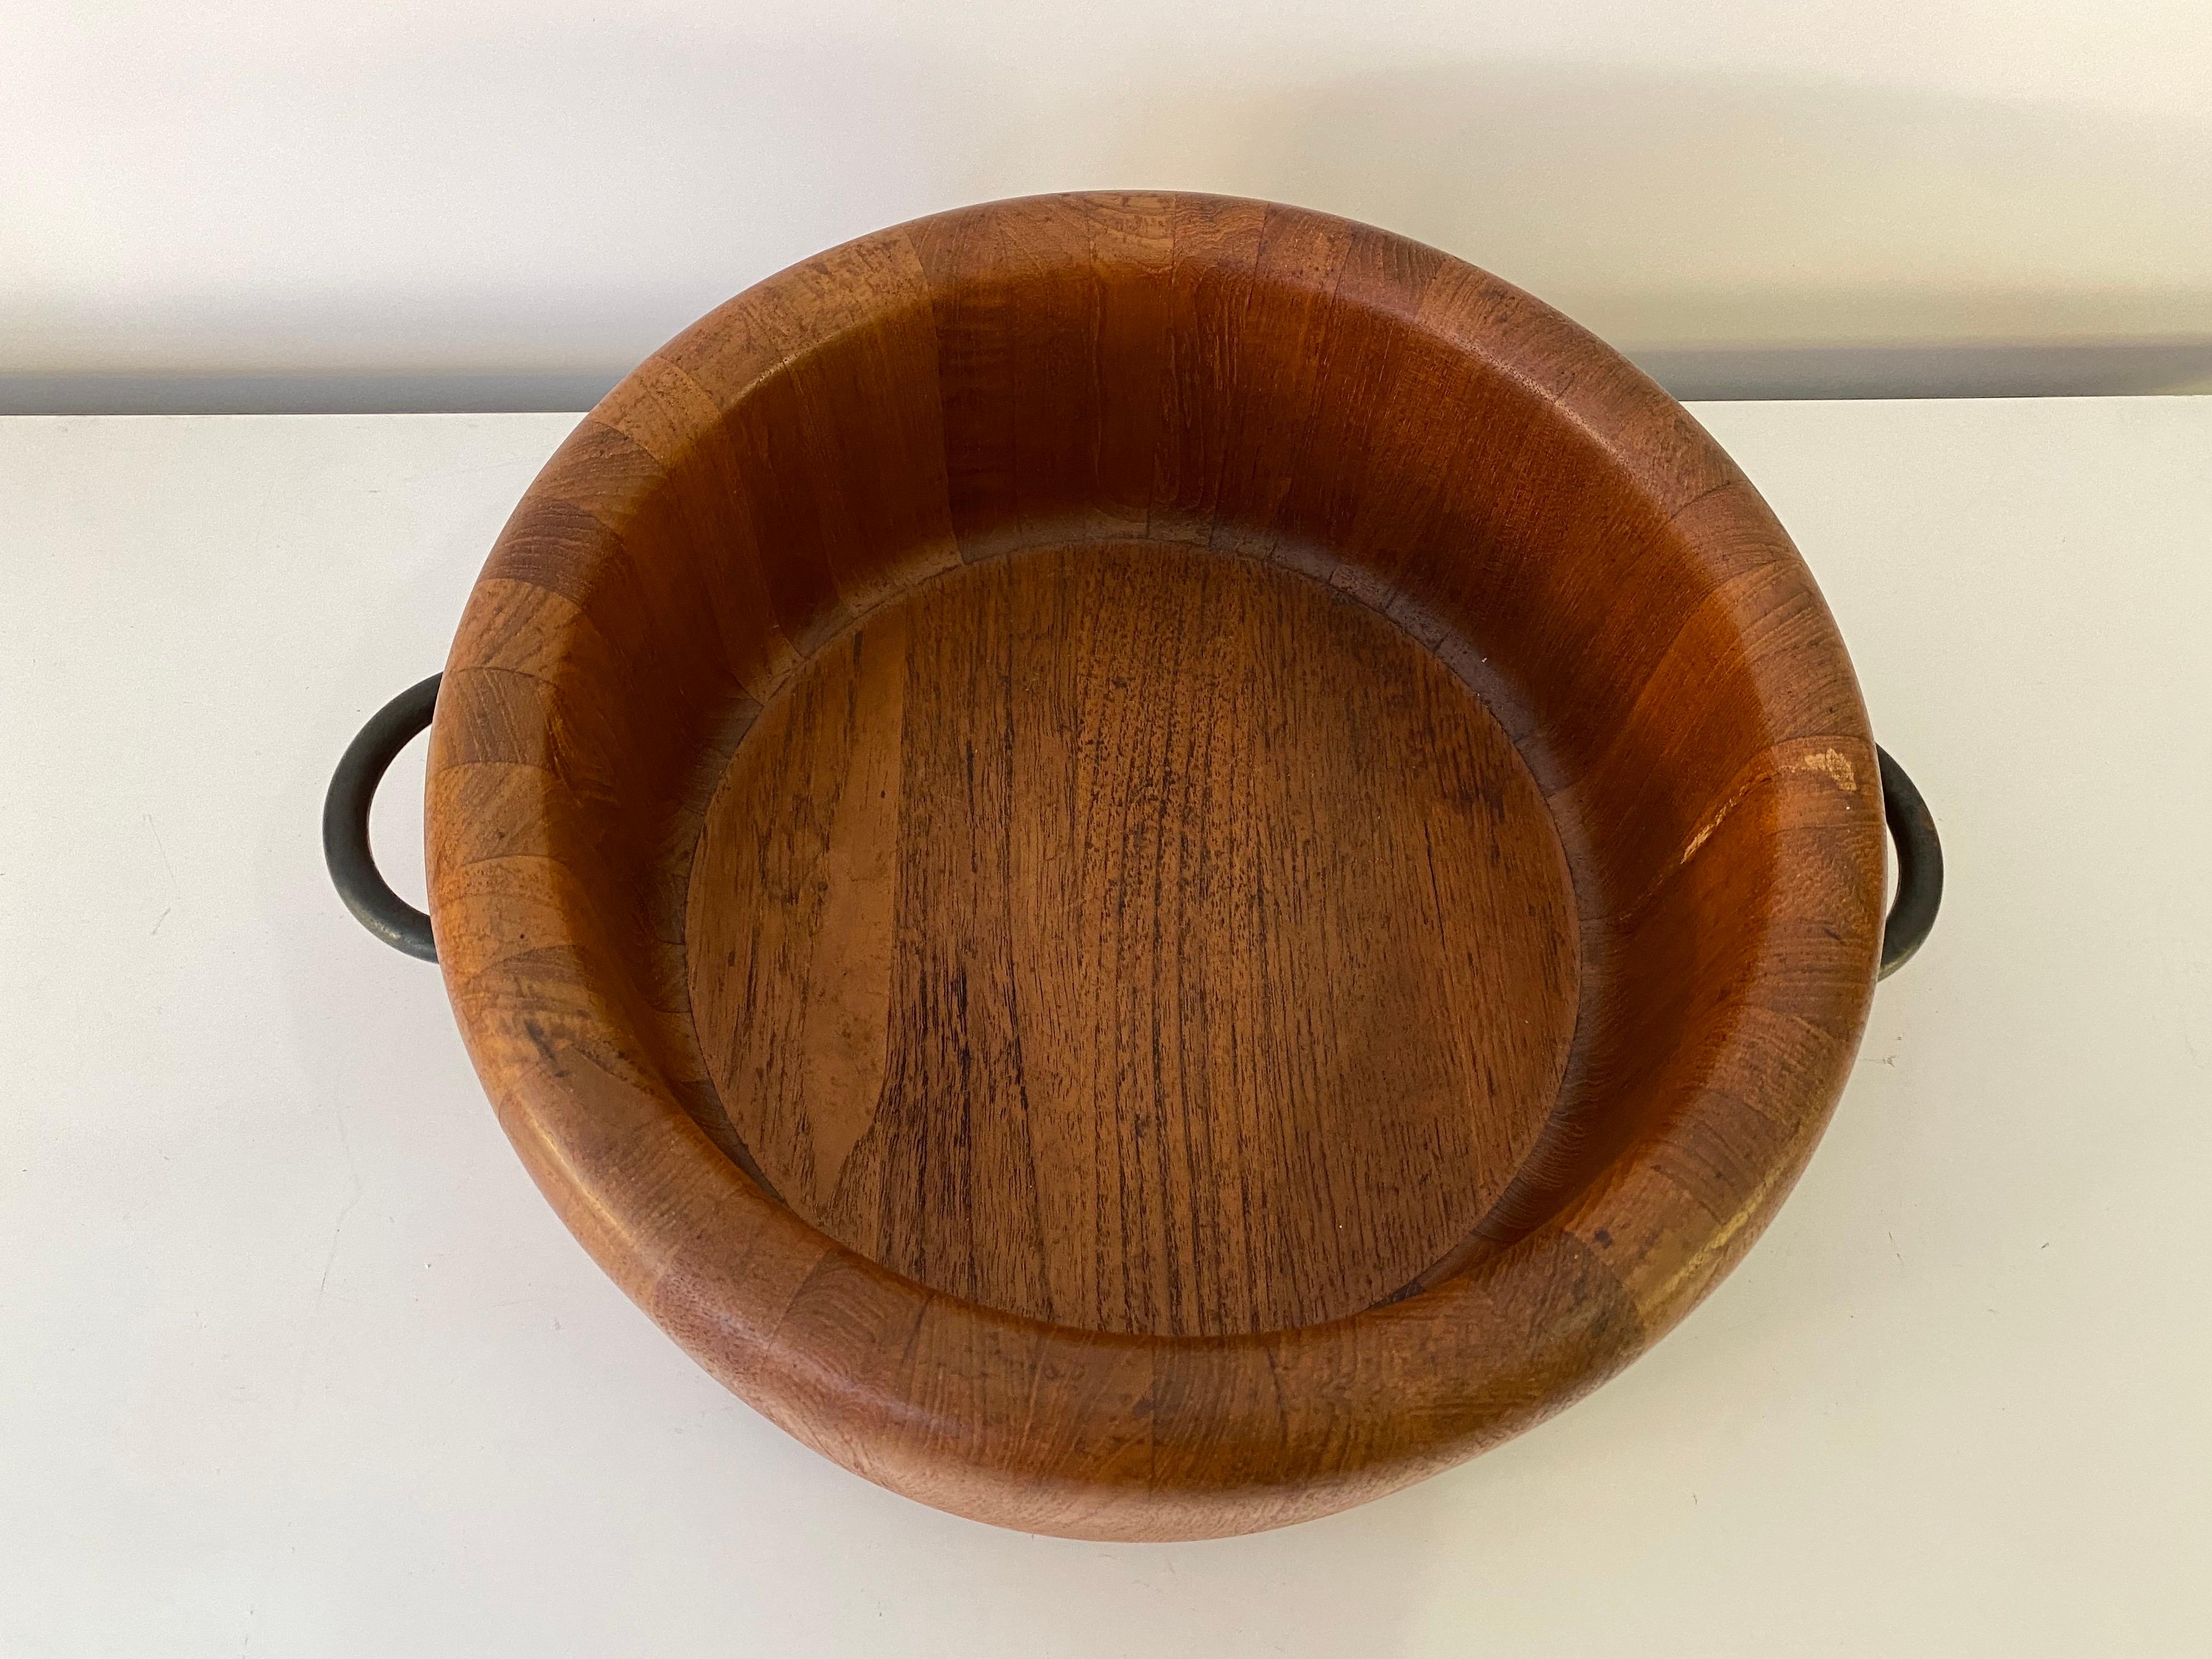 Flemming Digsmed teak salad bowl with half-round metal handles. Solid Teak Construction. Very nice quality!.